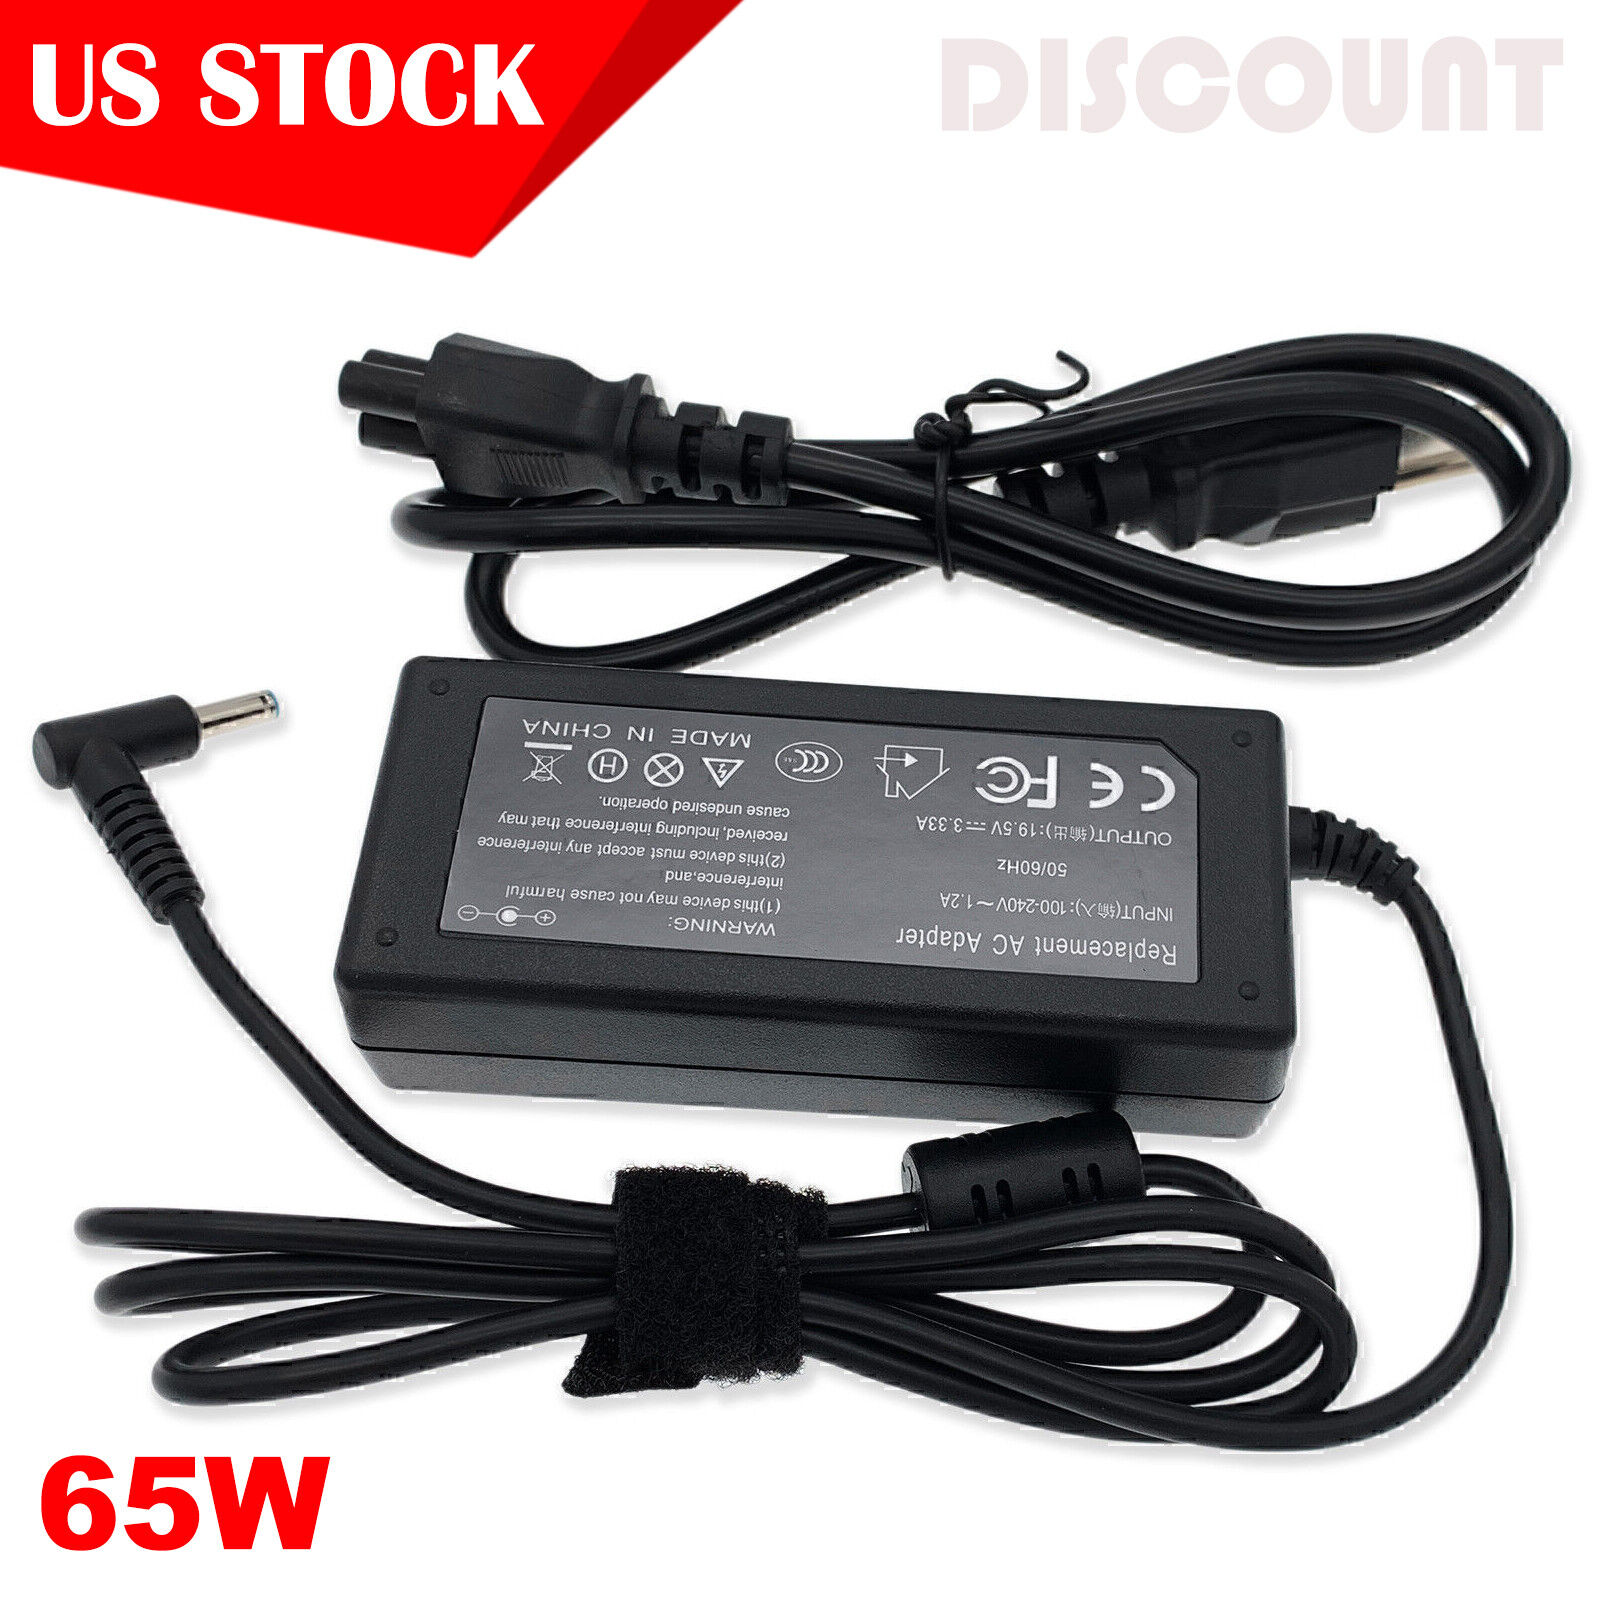 AC Adapter Charger Power For HP ProBook 430 G3, 450 G3, 455 G3, 470 G3, 440 G3